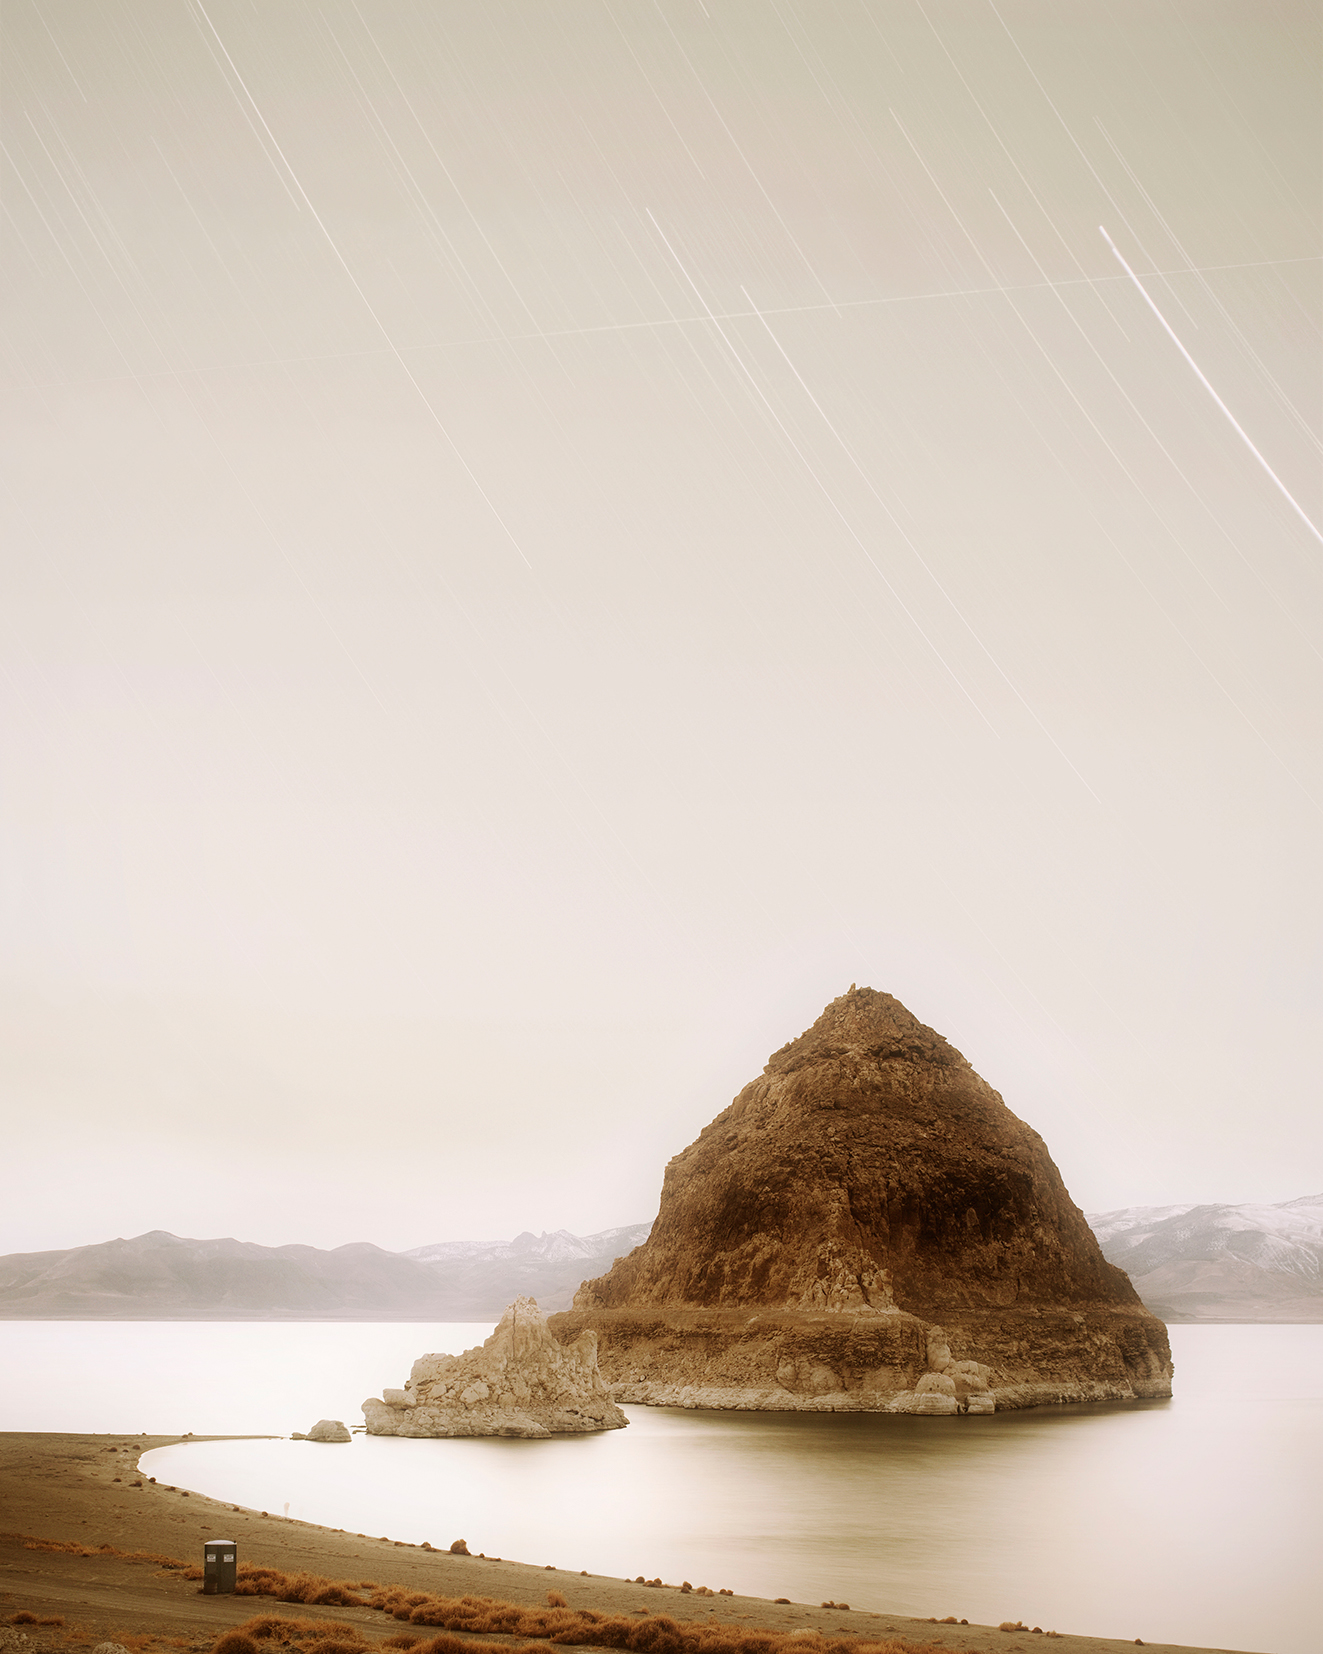  © Trevor Paglen, „DMSP 5B/F4 from Pyramid Lake Indian Reservation Military Meteorological Satellite; 1973-054A“, 2009 